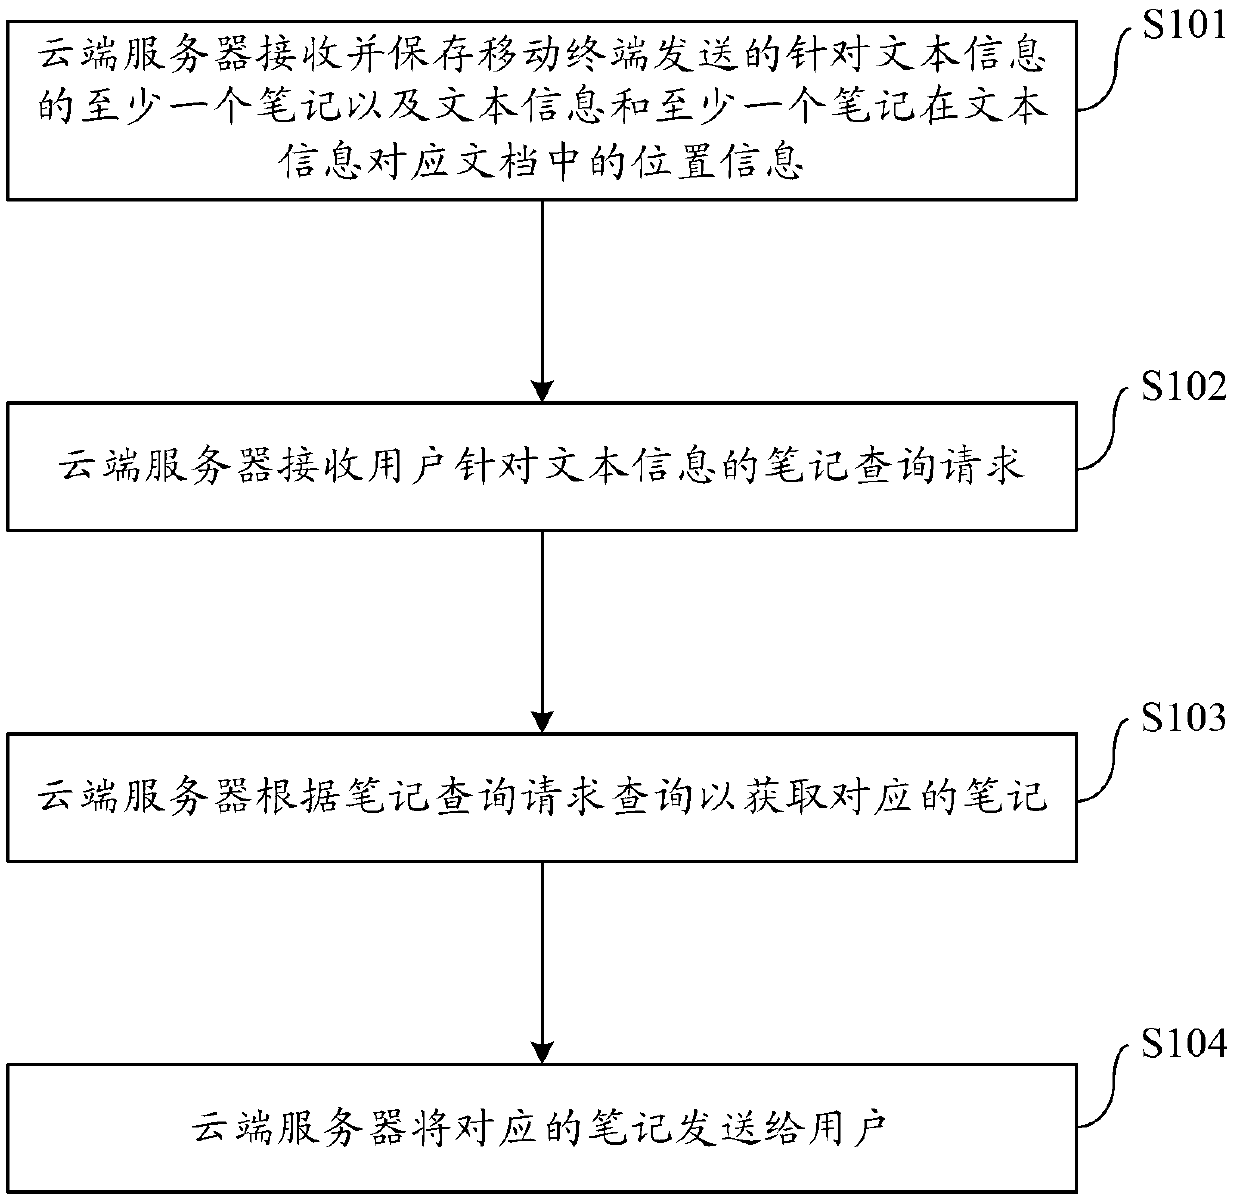 Method and system used for sharing notes and based on network and cloud server